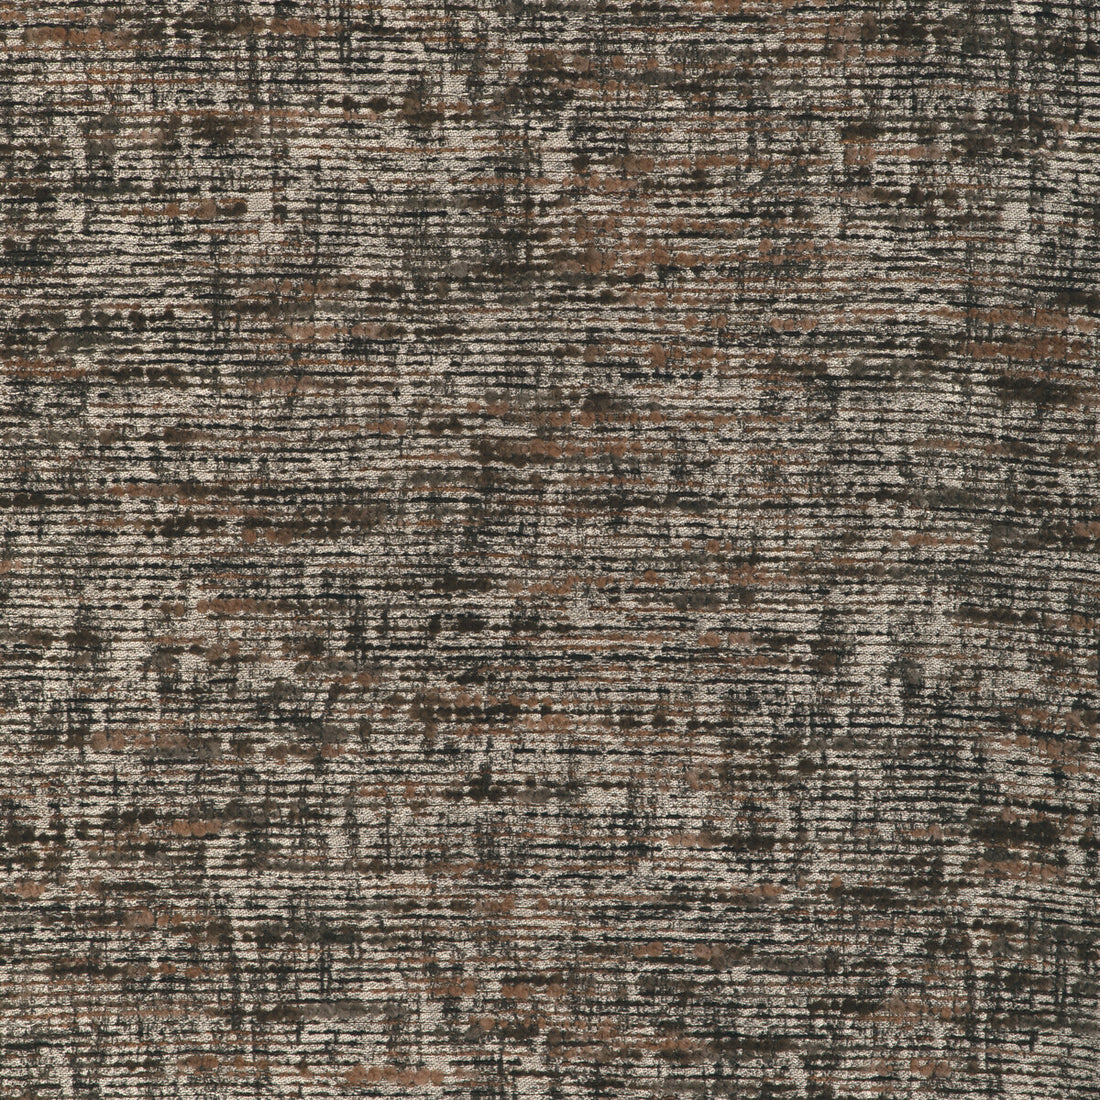 Pierre Texture fabric in ebony color - pattern 8023143.6106.0 - by Brunschwig &amp; Fils in the Celeste collection